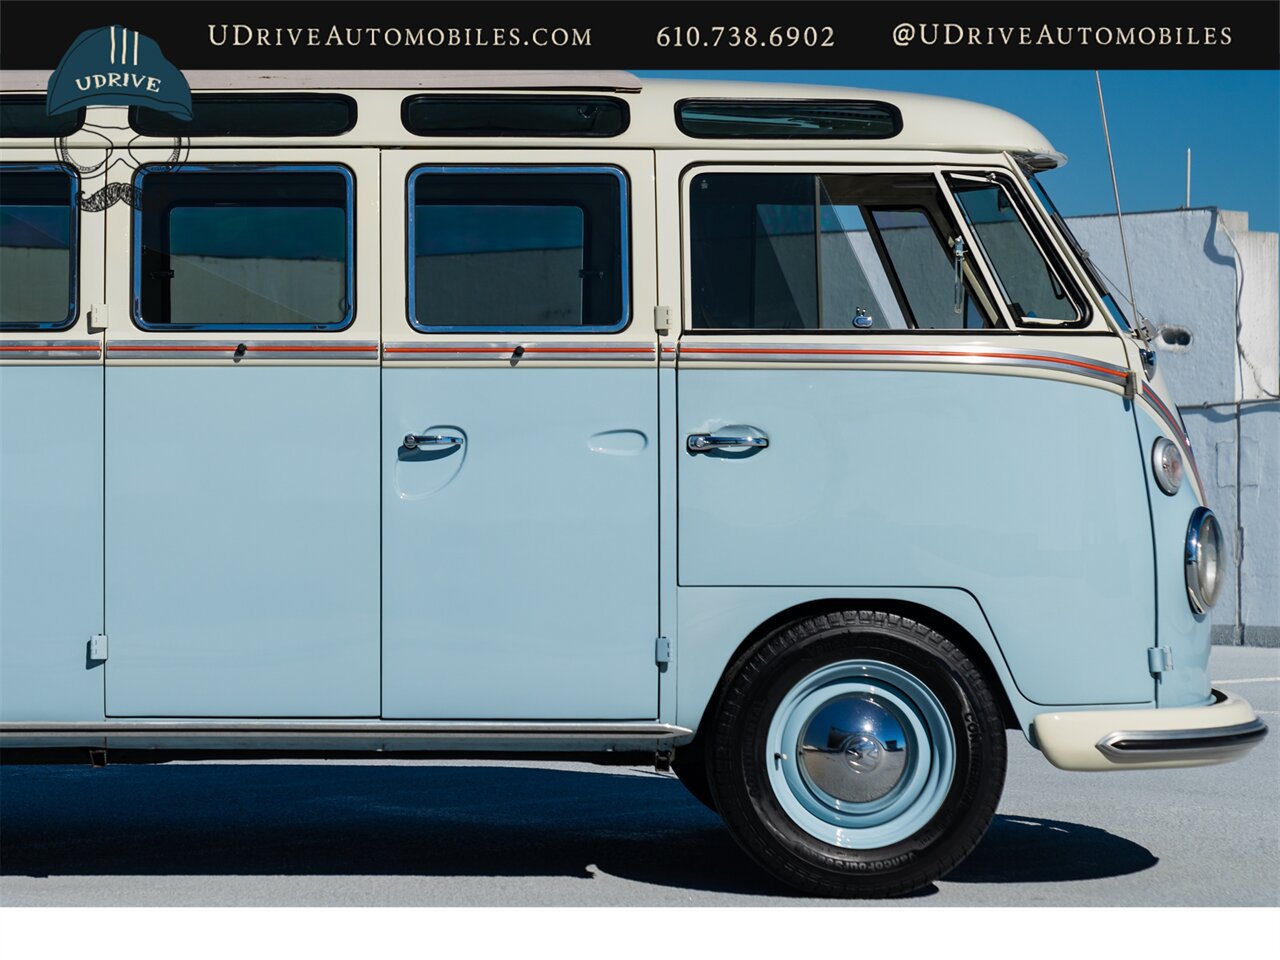 1965 Volkswagen Bus/Vanagon 21 Window Deluxe Transporter  Built By East Coast VW Restorations 1914cc A/C - Photo 17 - West Chester, PA 19382